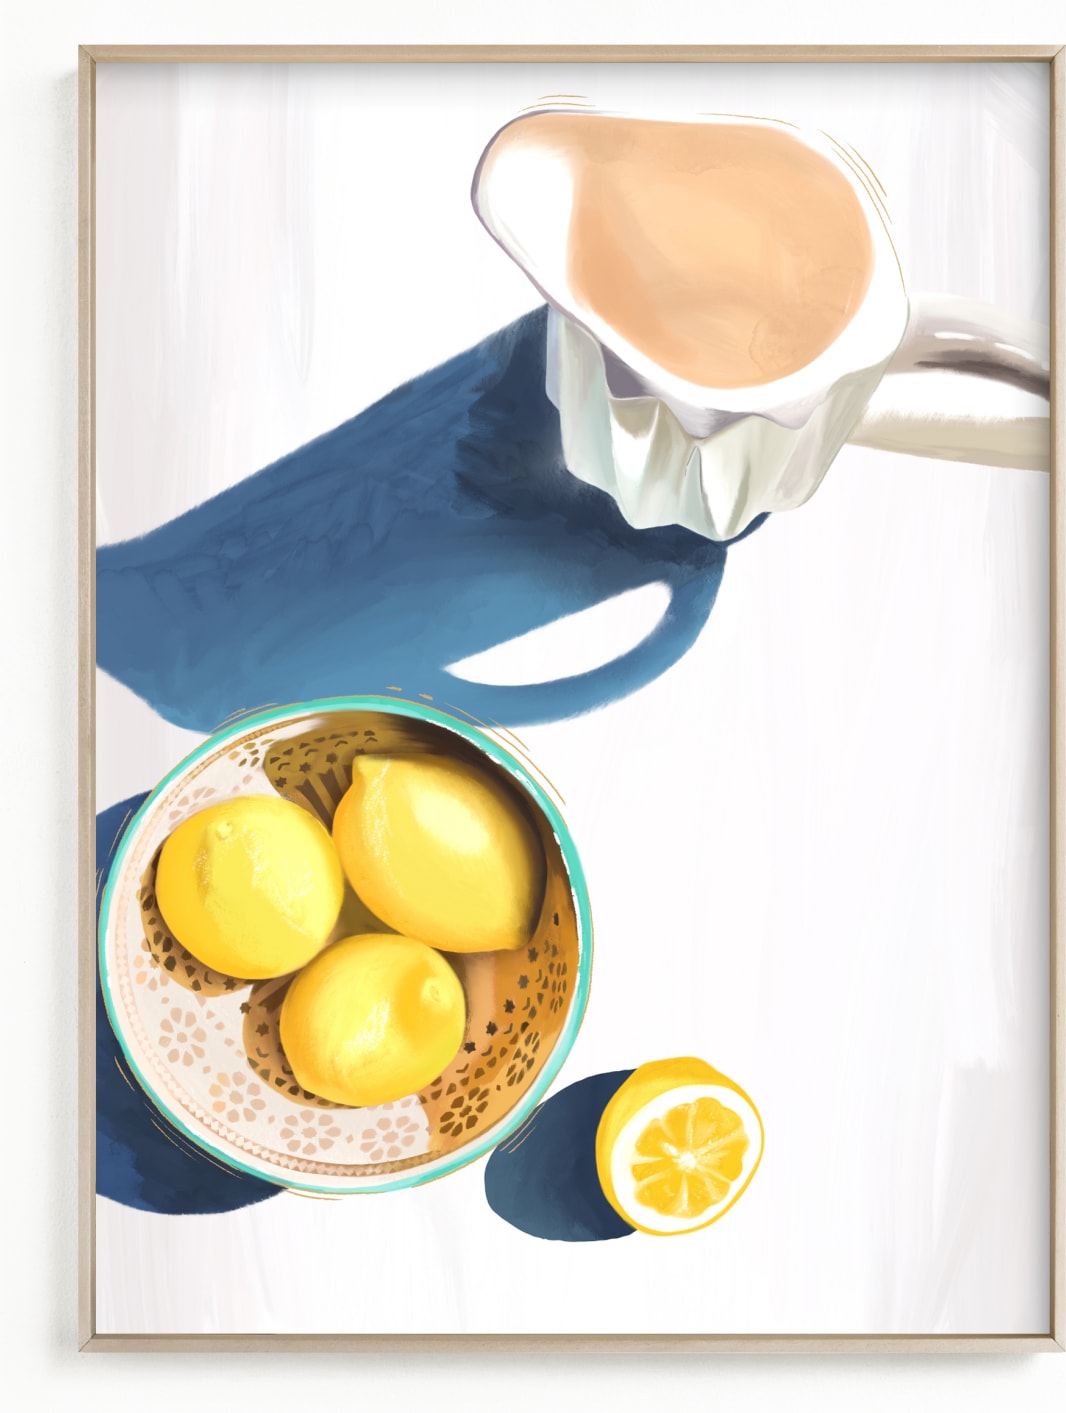 This is a blue art by Kinga Subject called Flatlay Lemon Study No.2.